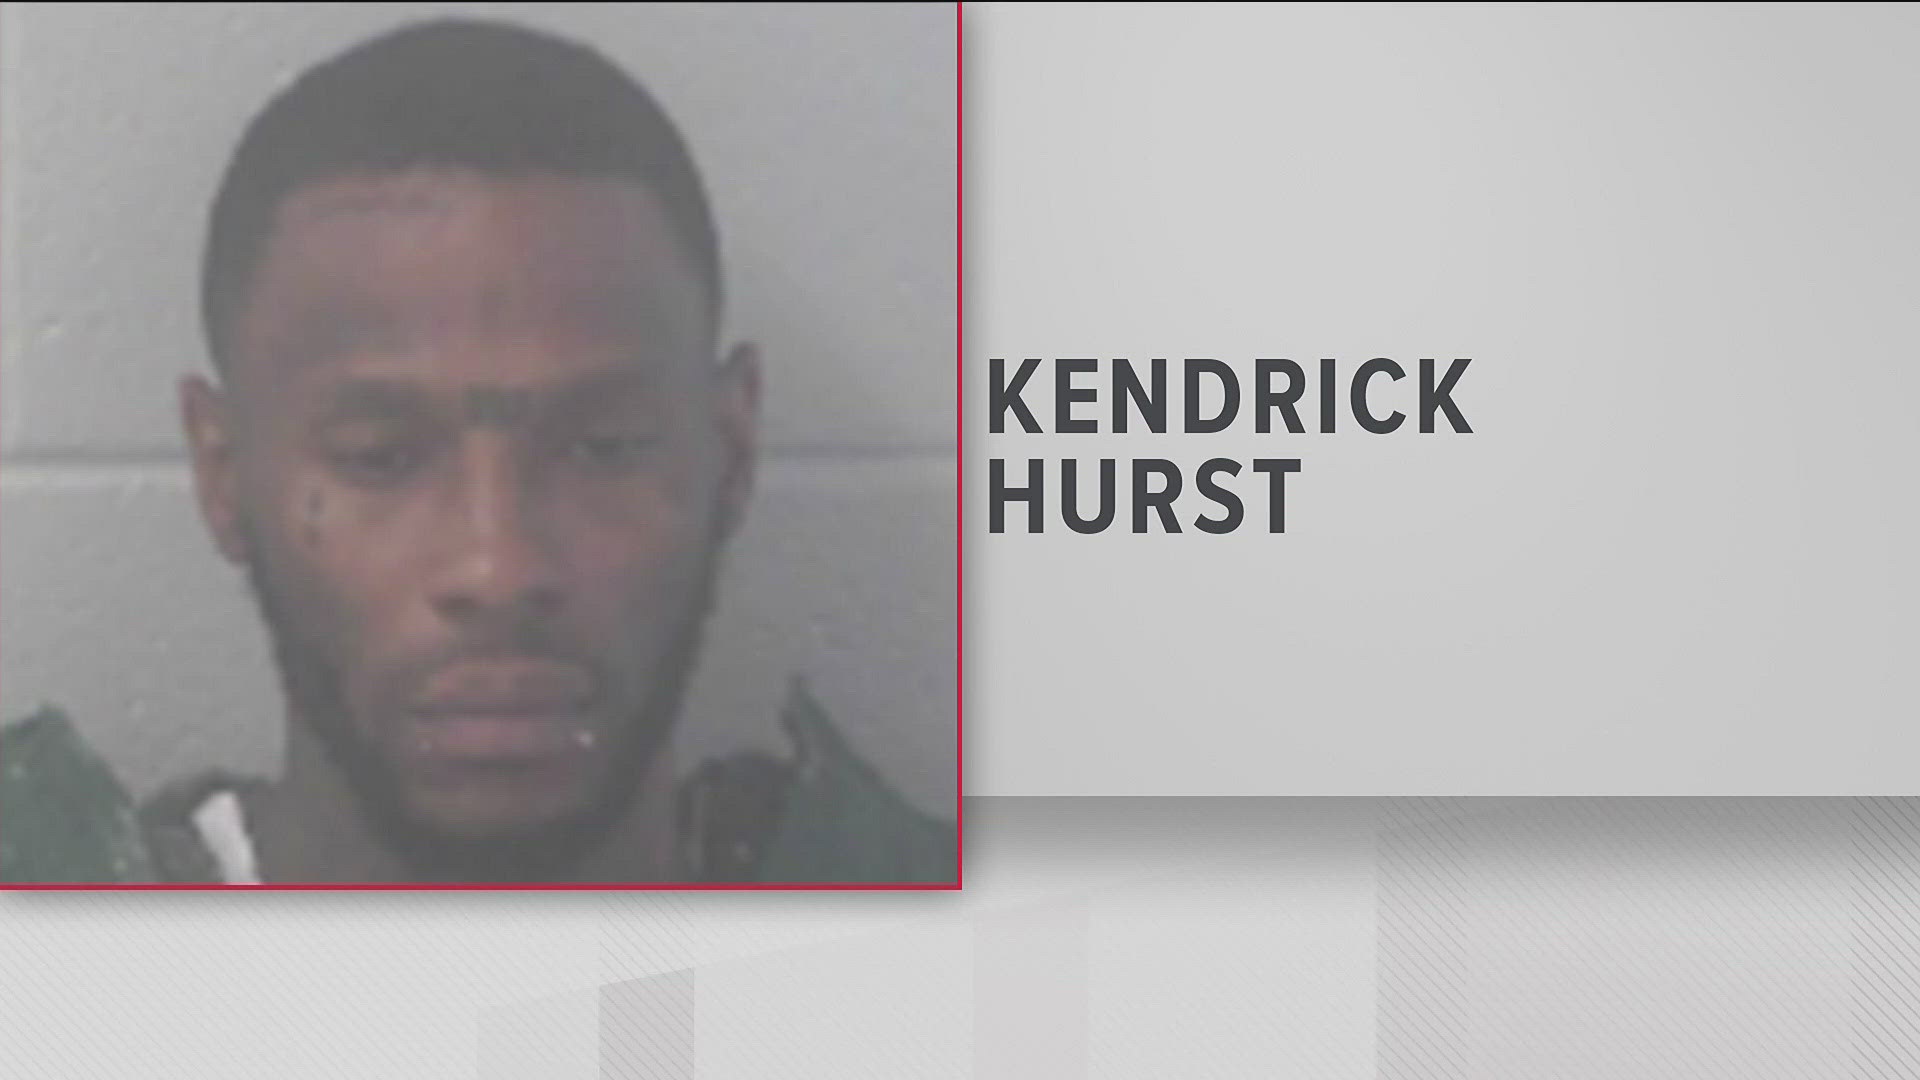 The sheriff's office said that Kendrick Hurst was wearing a bright lime green jumpsuit when he escaped.